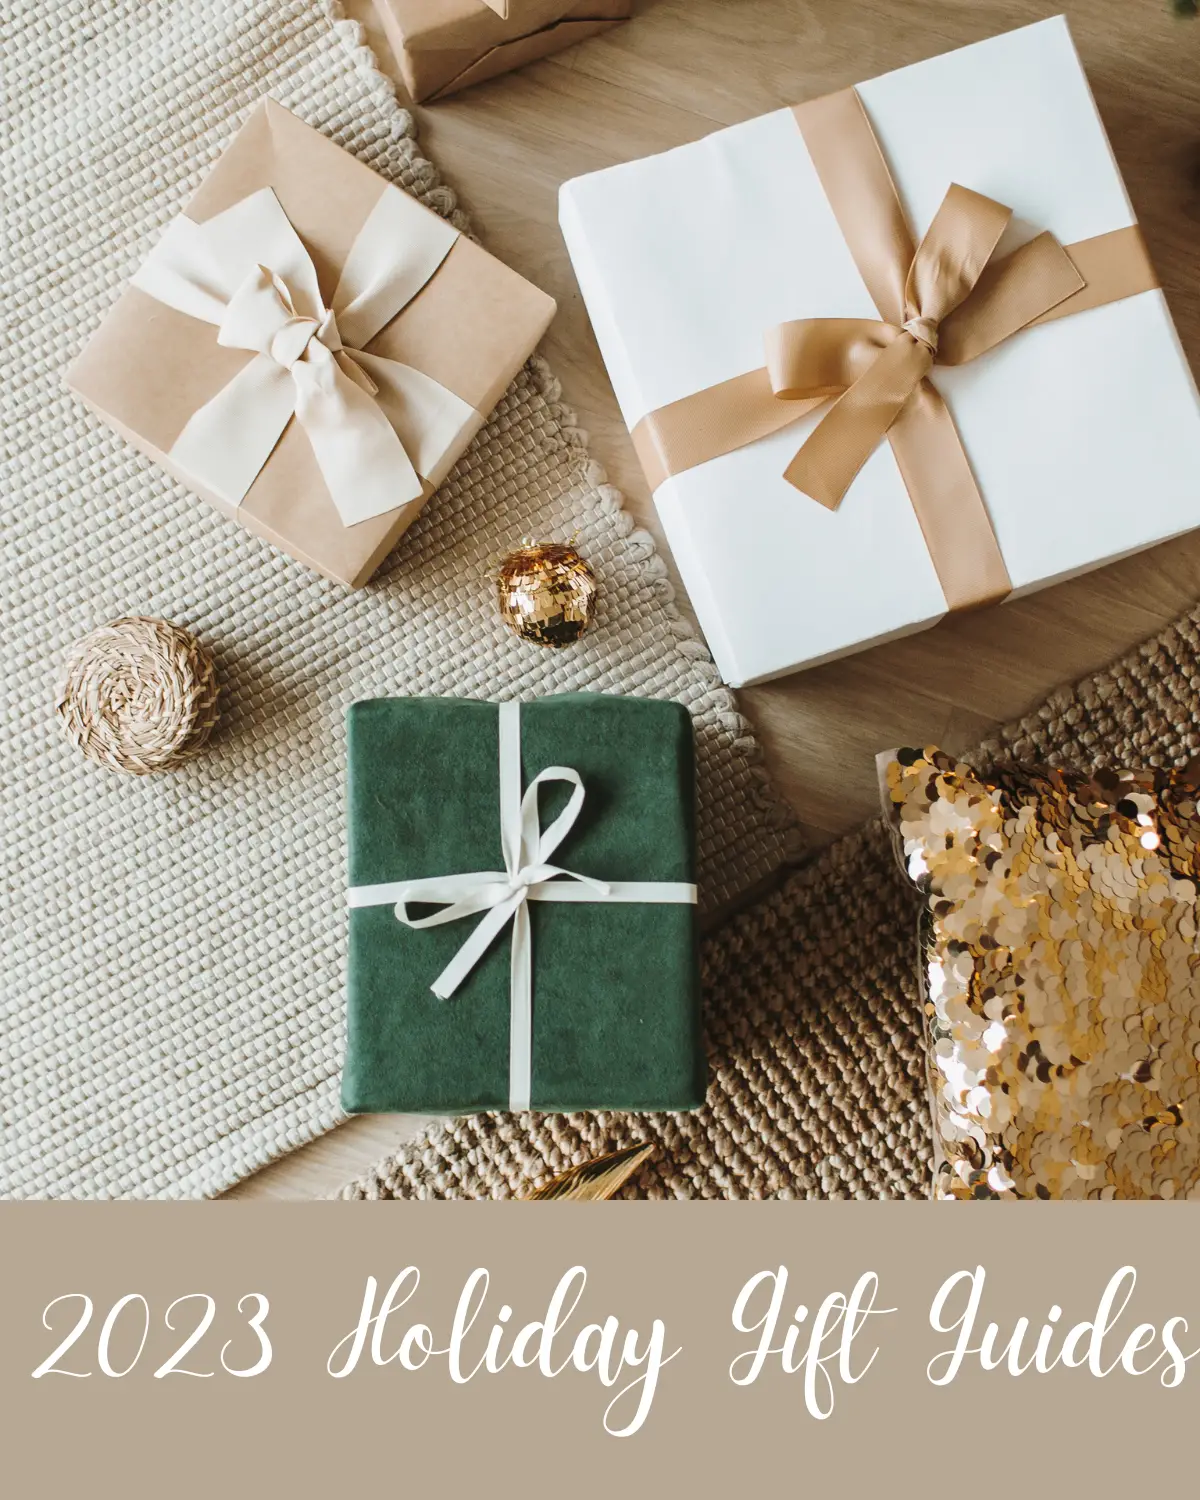 9 Simple Steps to Create and Promote a Holiday Gift Guide in 2023